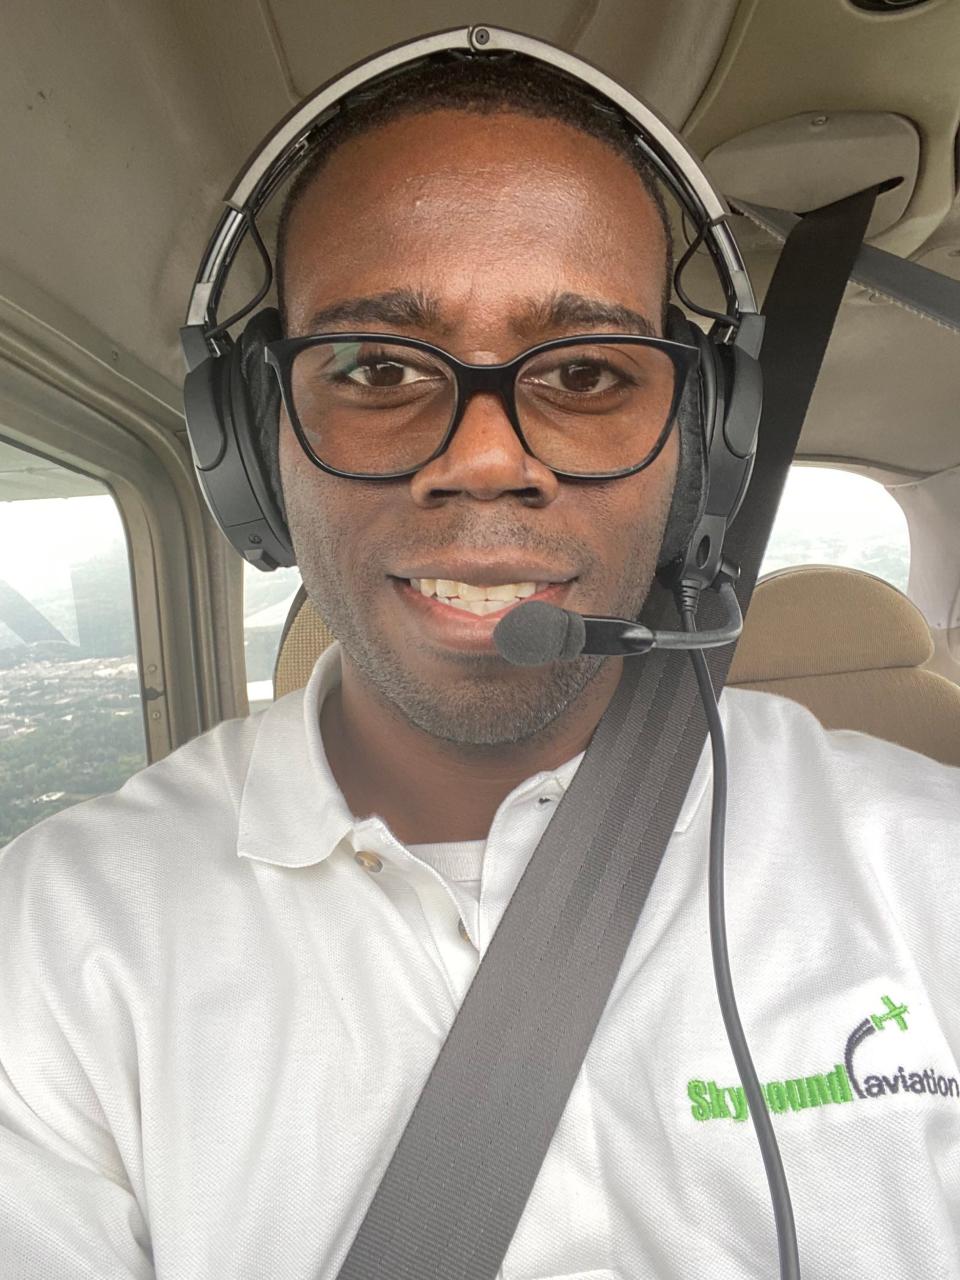 Ezekiel Andrews has spent over 10 years working to gain enough hours to become a pilot for a major airline.